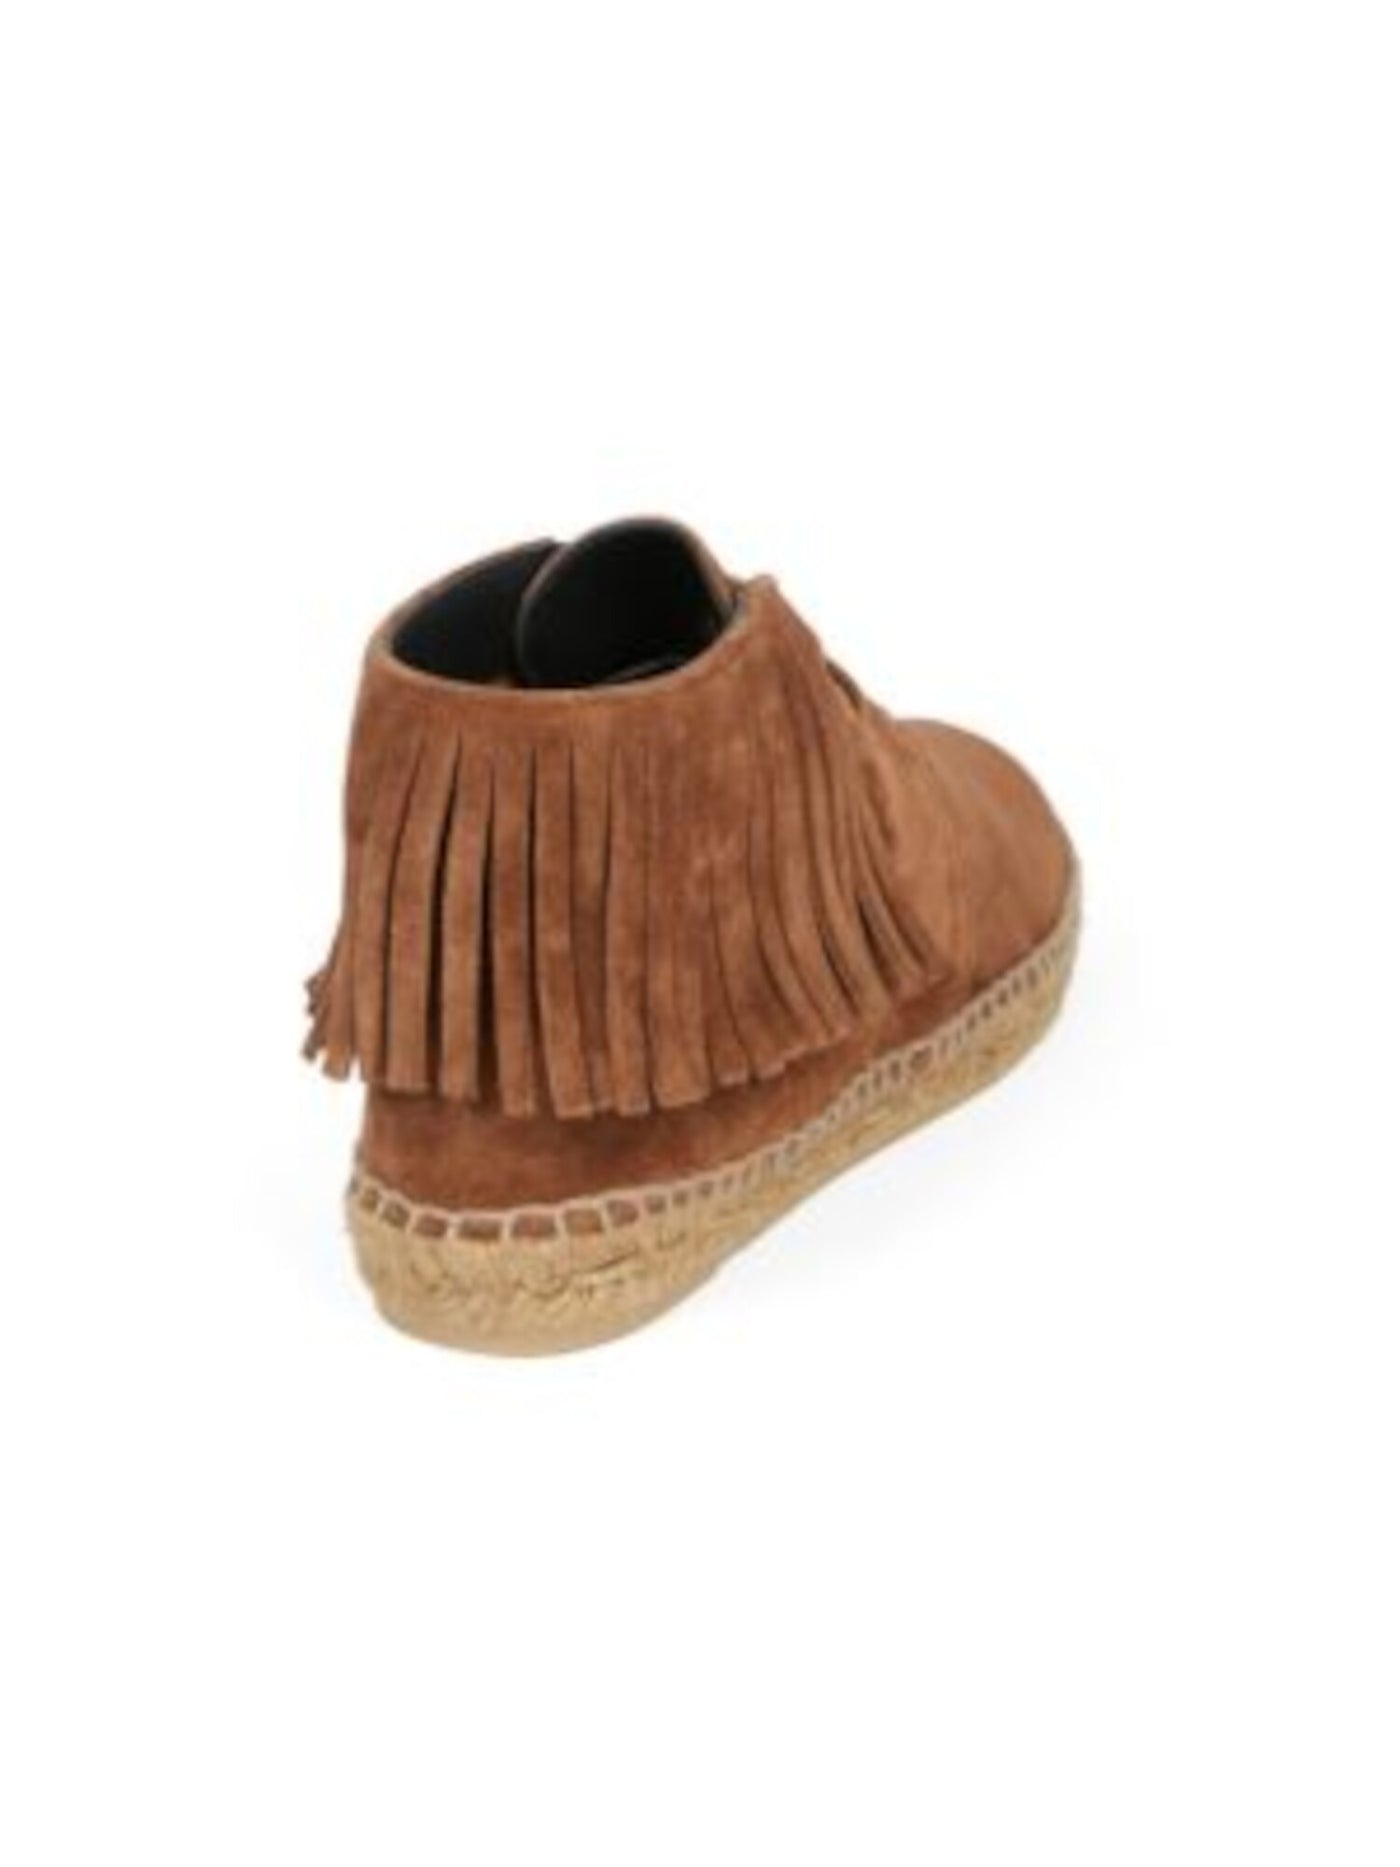 SAINT LAURENT Womens Brown Jute Wrapped Sole Fringed Comfort Florence Round Toe Platform Lace-Up Leather Moccasins Shoes 38